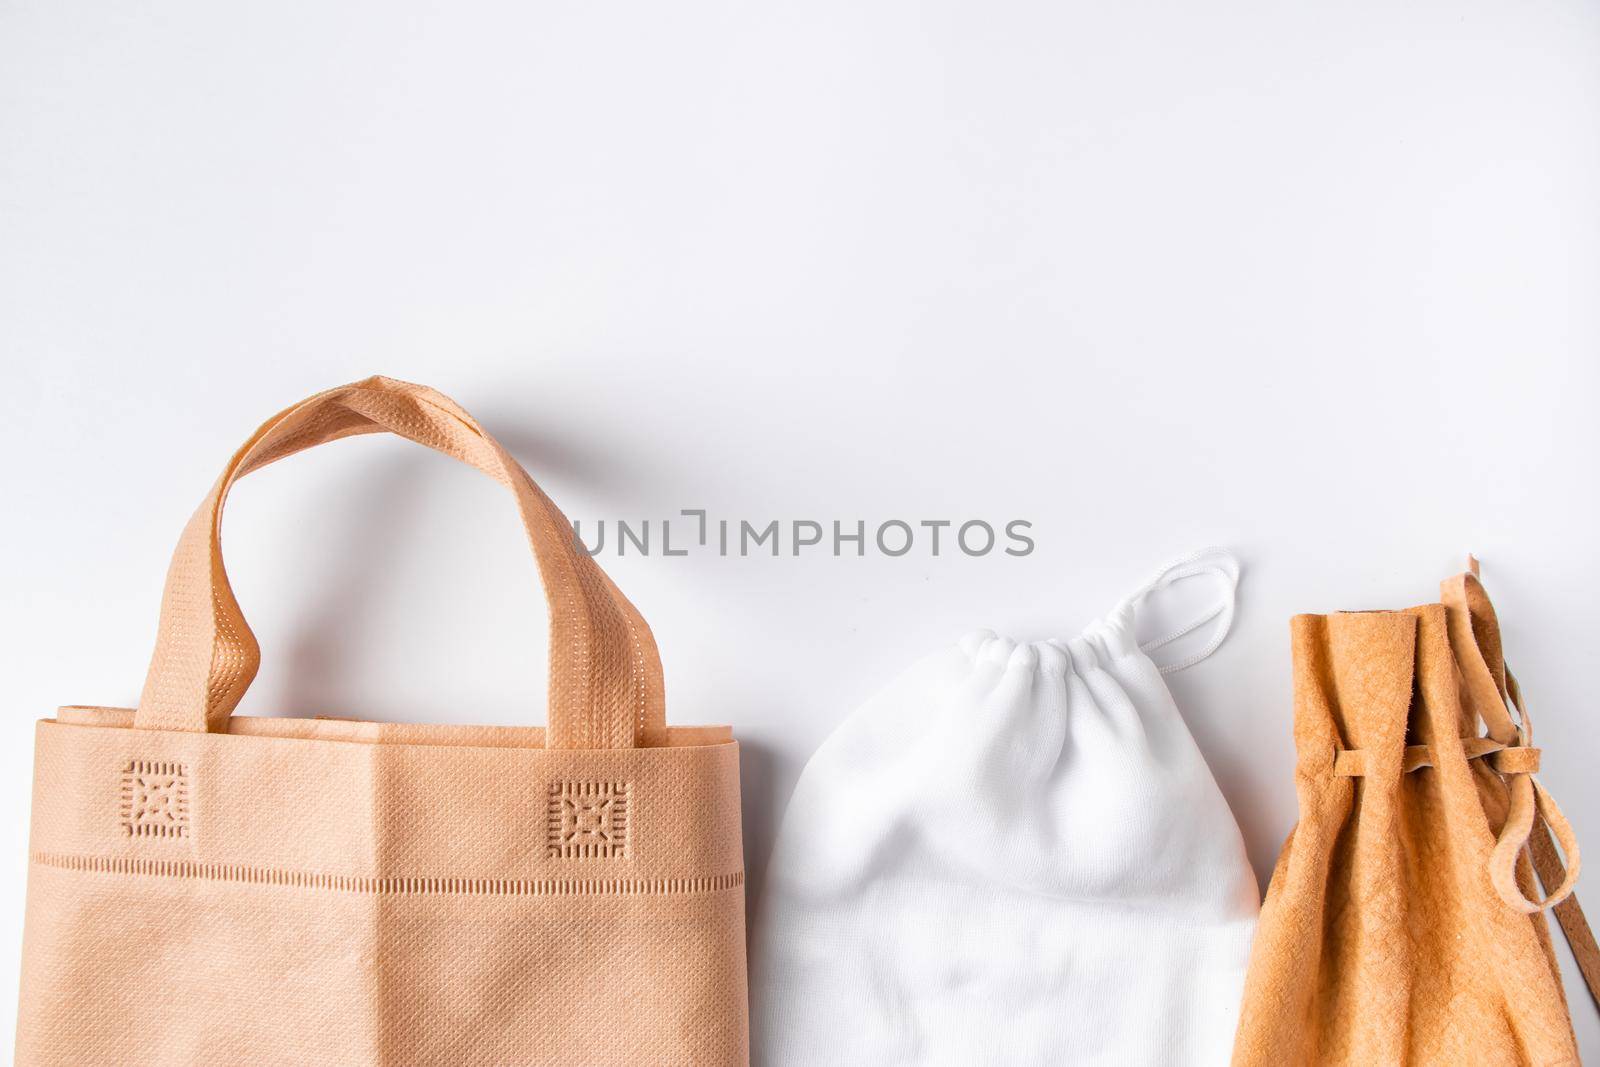 Zero waste concept. Set recycled home accessories - eco-friendly bags and wooden supplies by Statuska